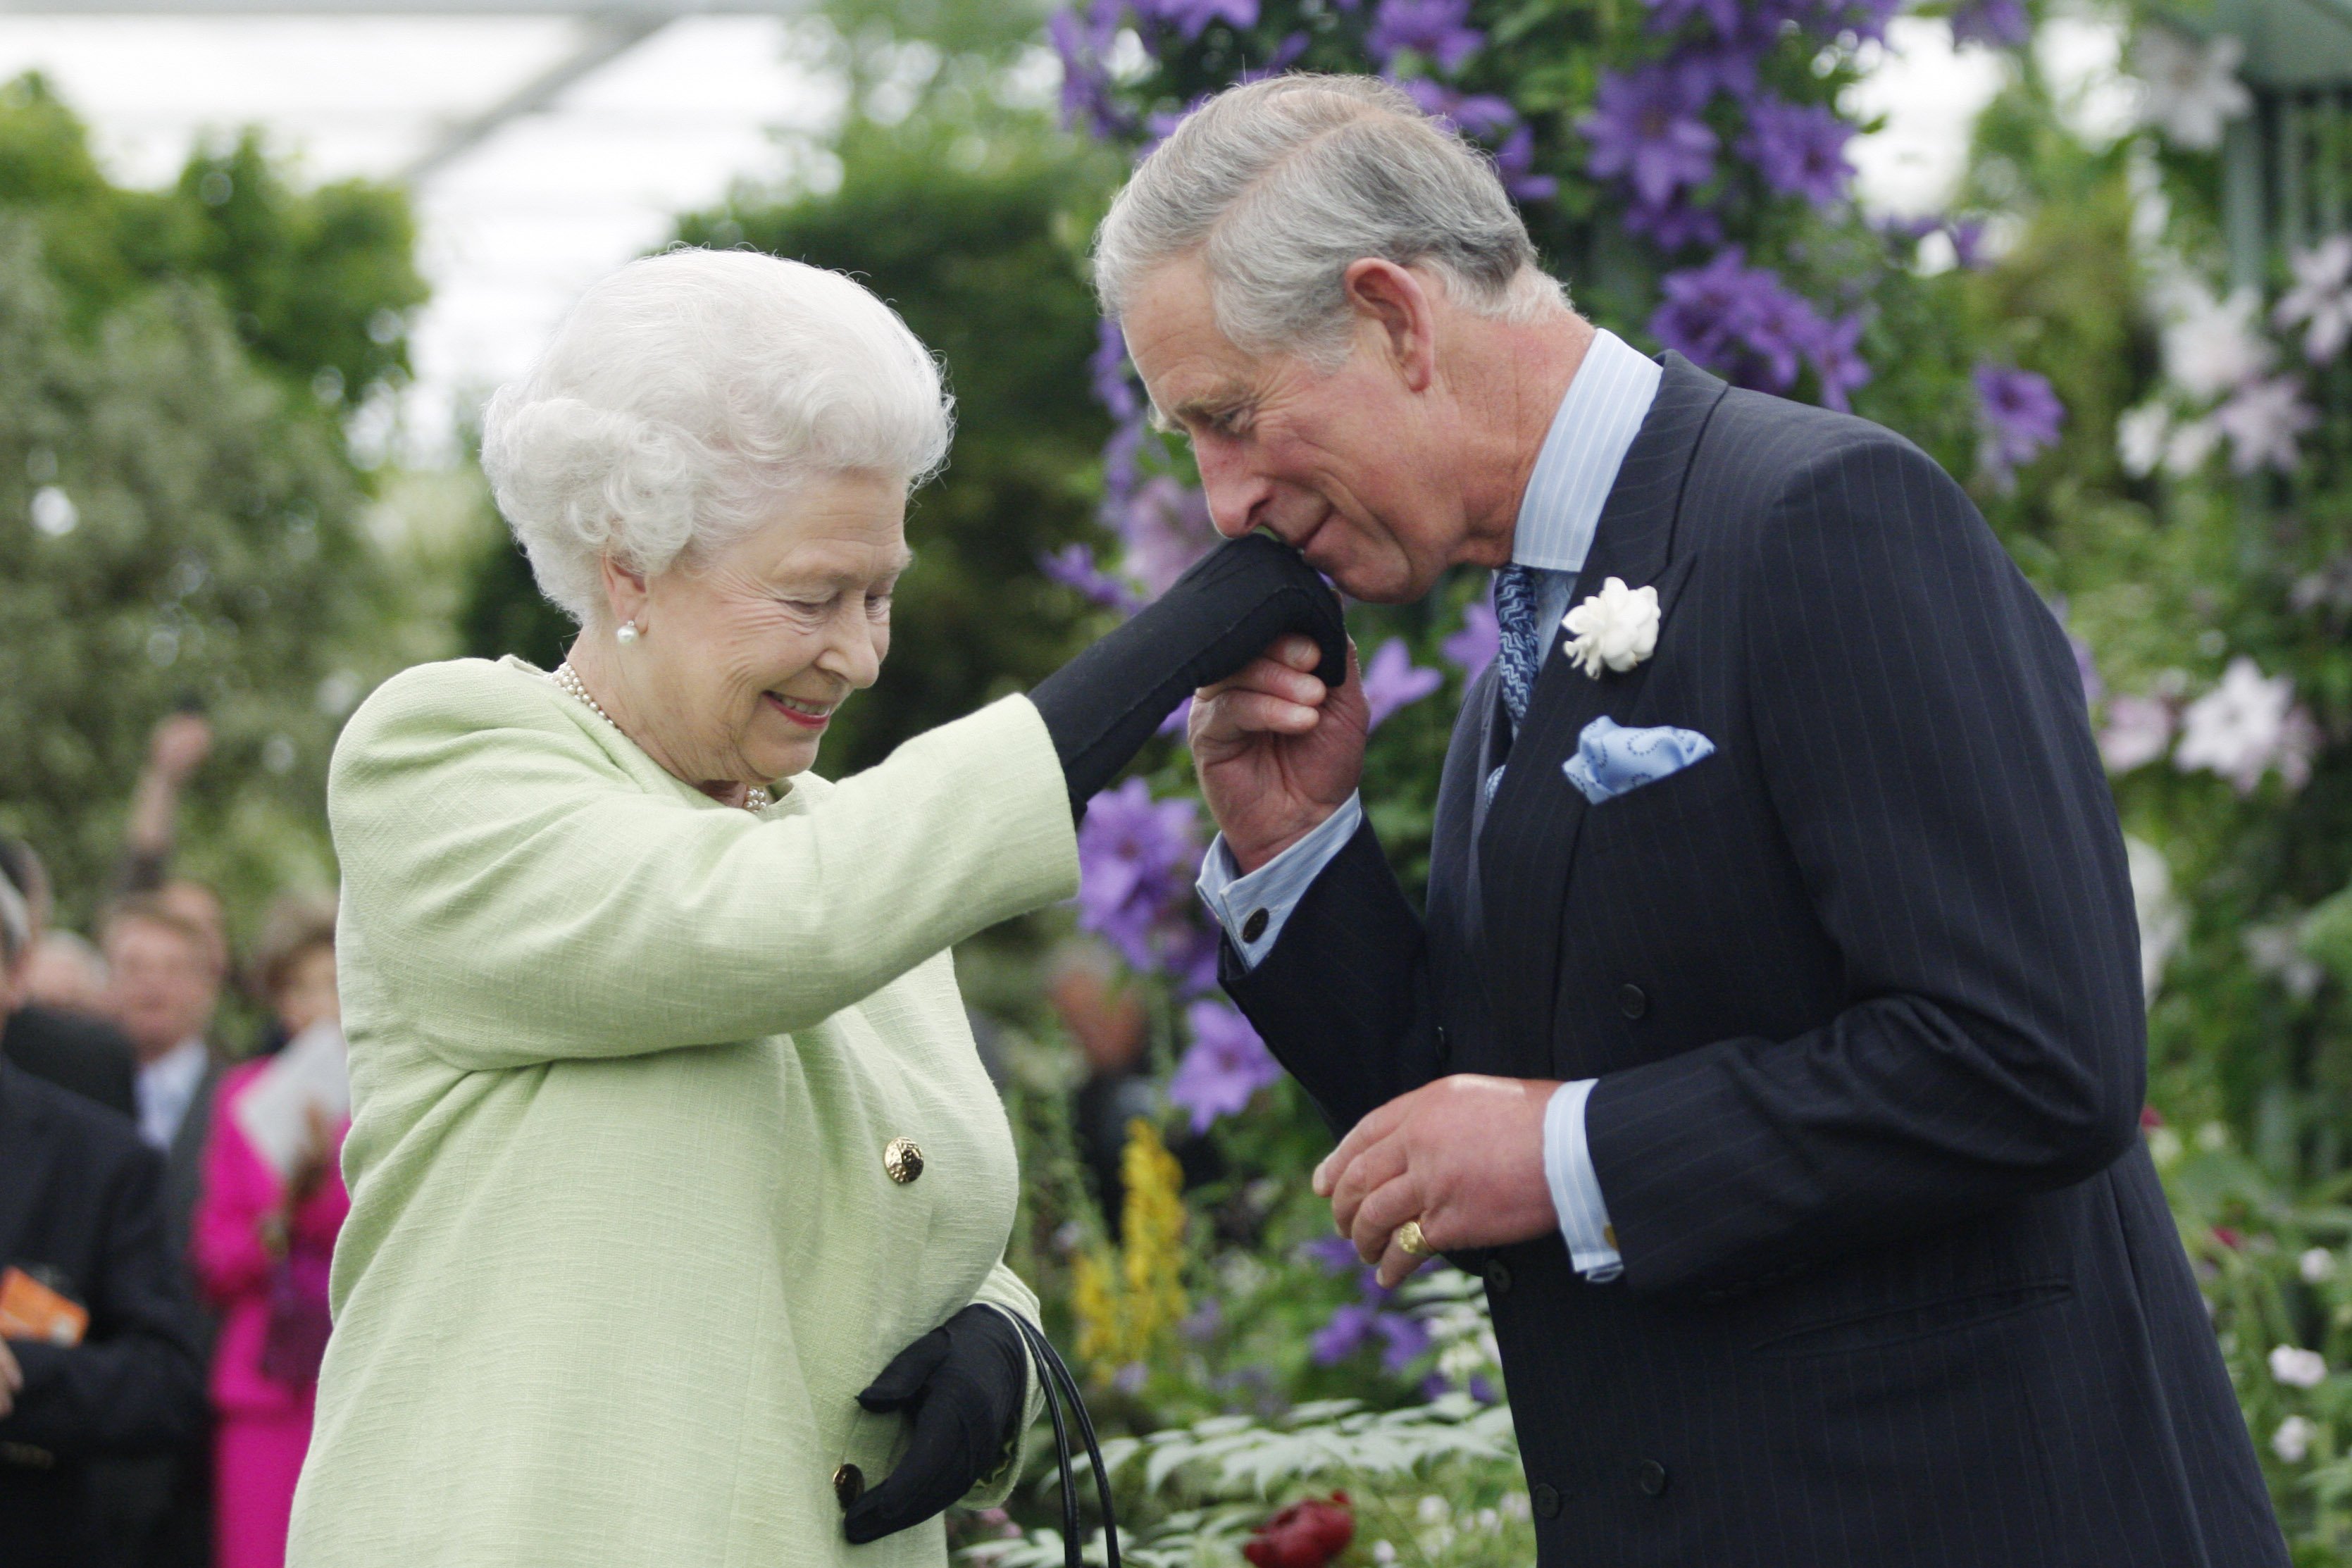 Queen Elizabeth II presents Prince Charles, Prince of Wales with the Royal Horticultural Society's Victoria Medal of Honour during a visit to the Chelsea Flower Show on May 18, 2009 in London. | Source: Getty Images